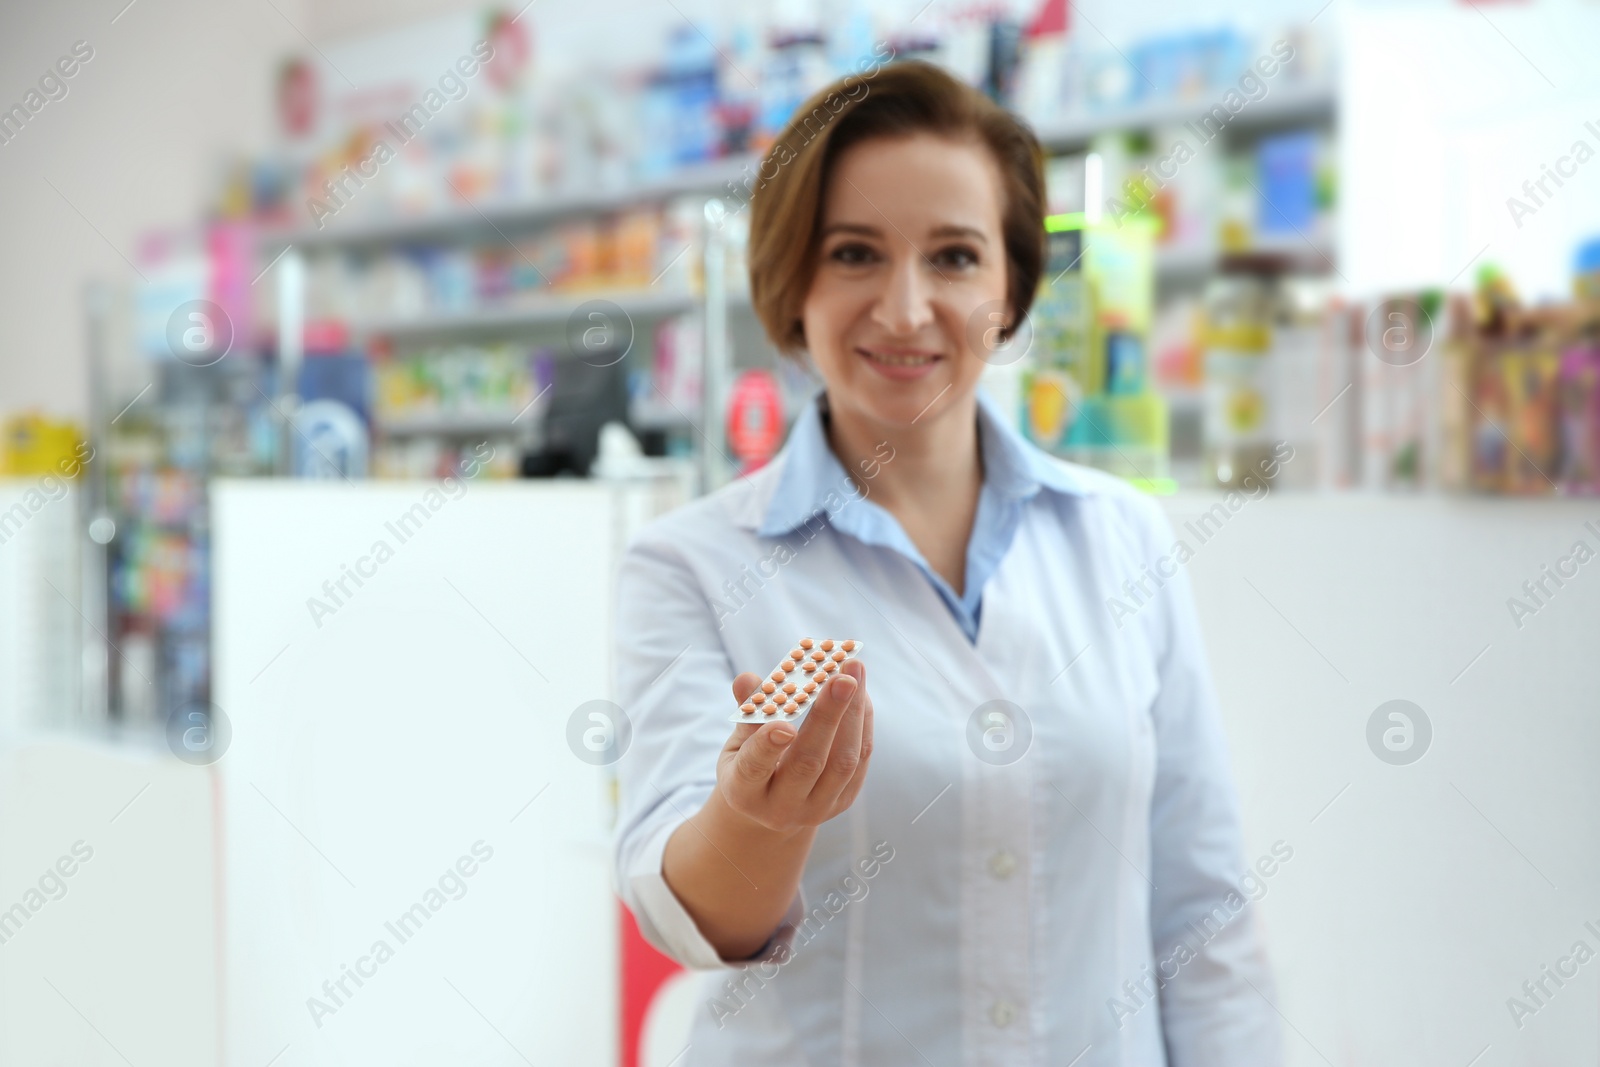 Image of Professional pharmacist in drugstore, focus on hand with pills